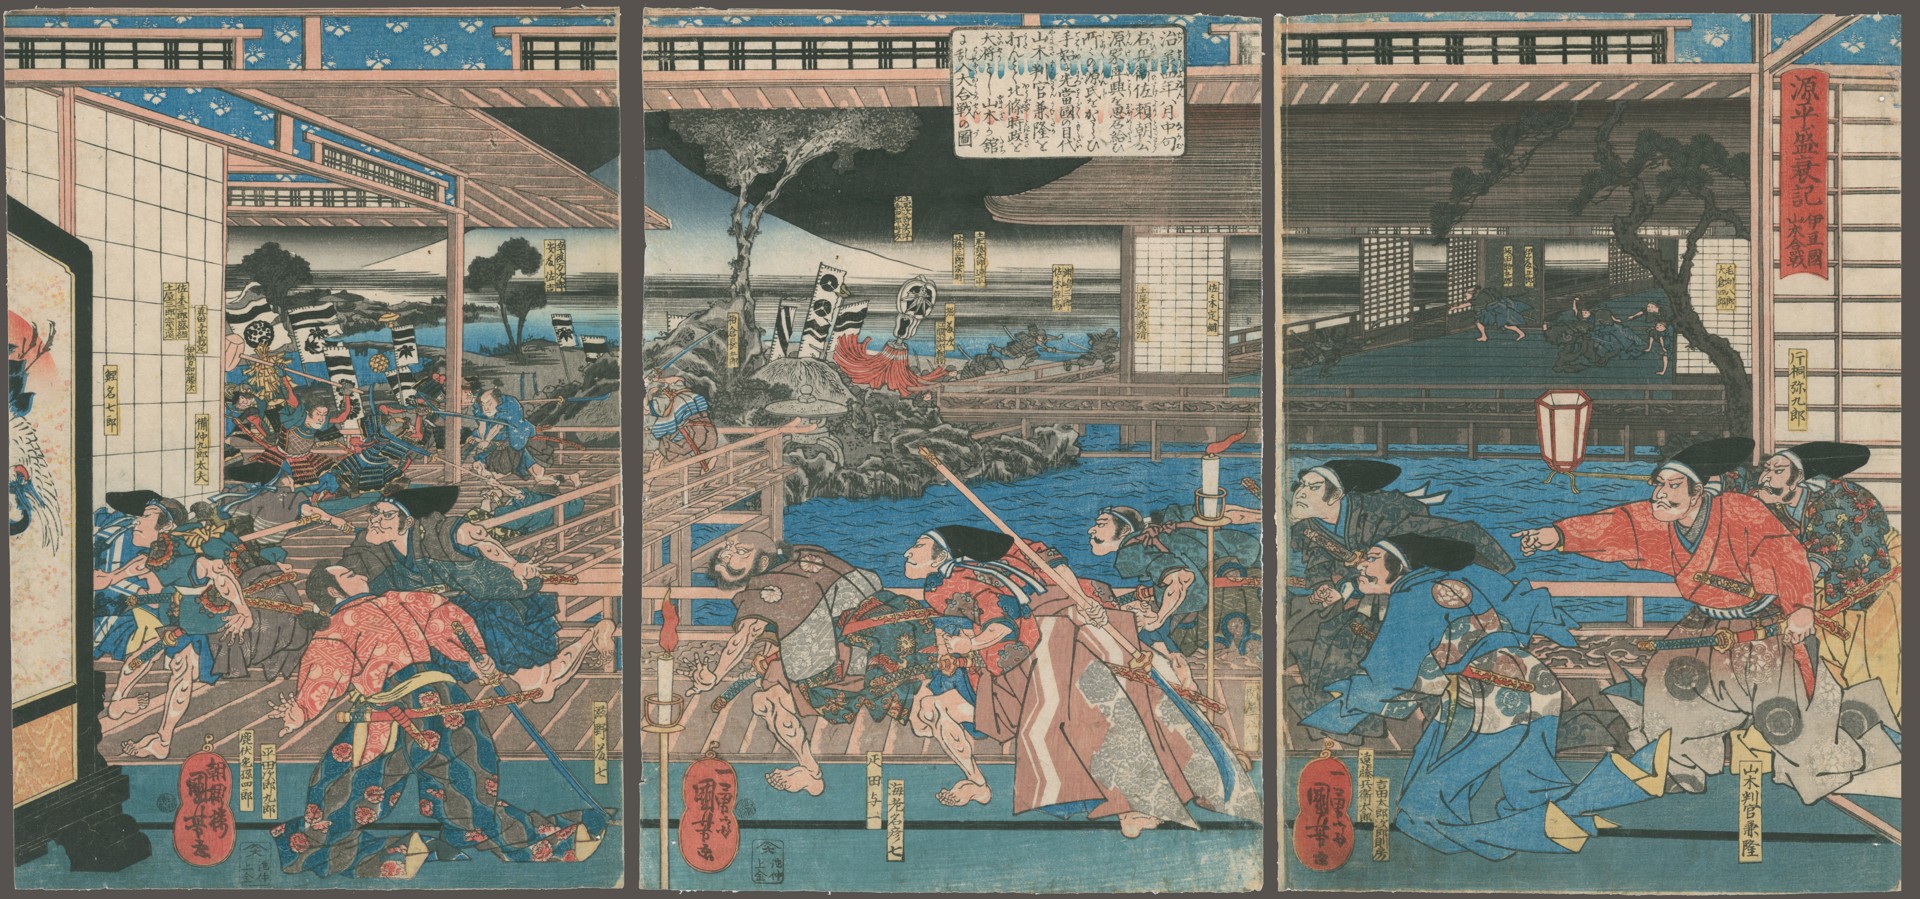 The Attack on Yamaki Palace History of the Ups and Downs of the Minamoto and Taira by Kuniyoshi